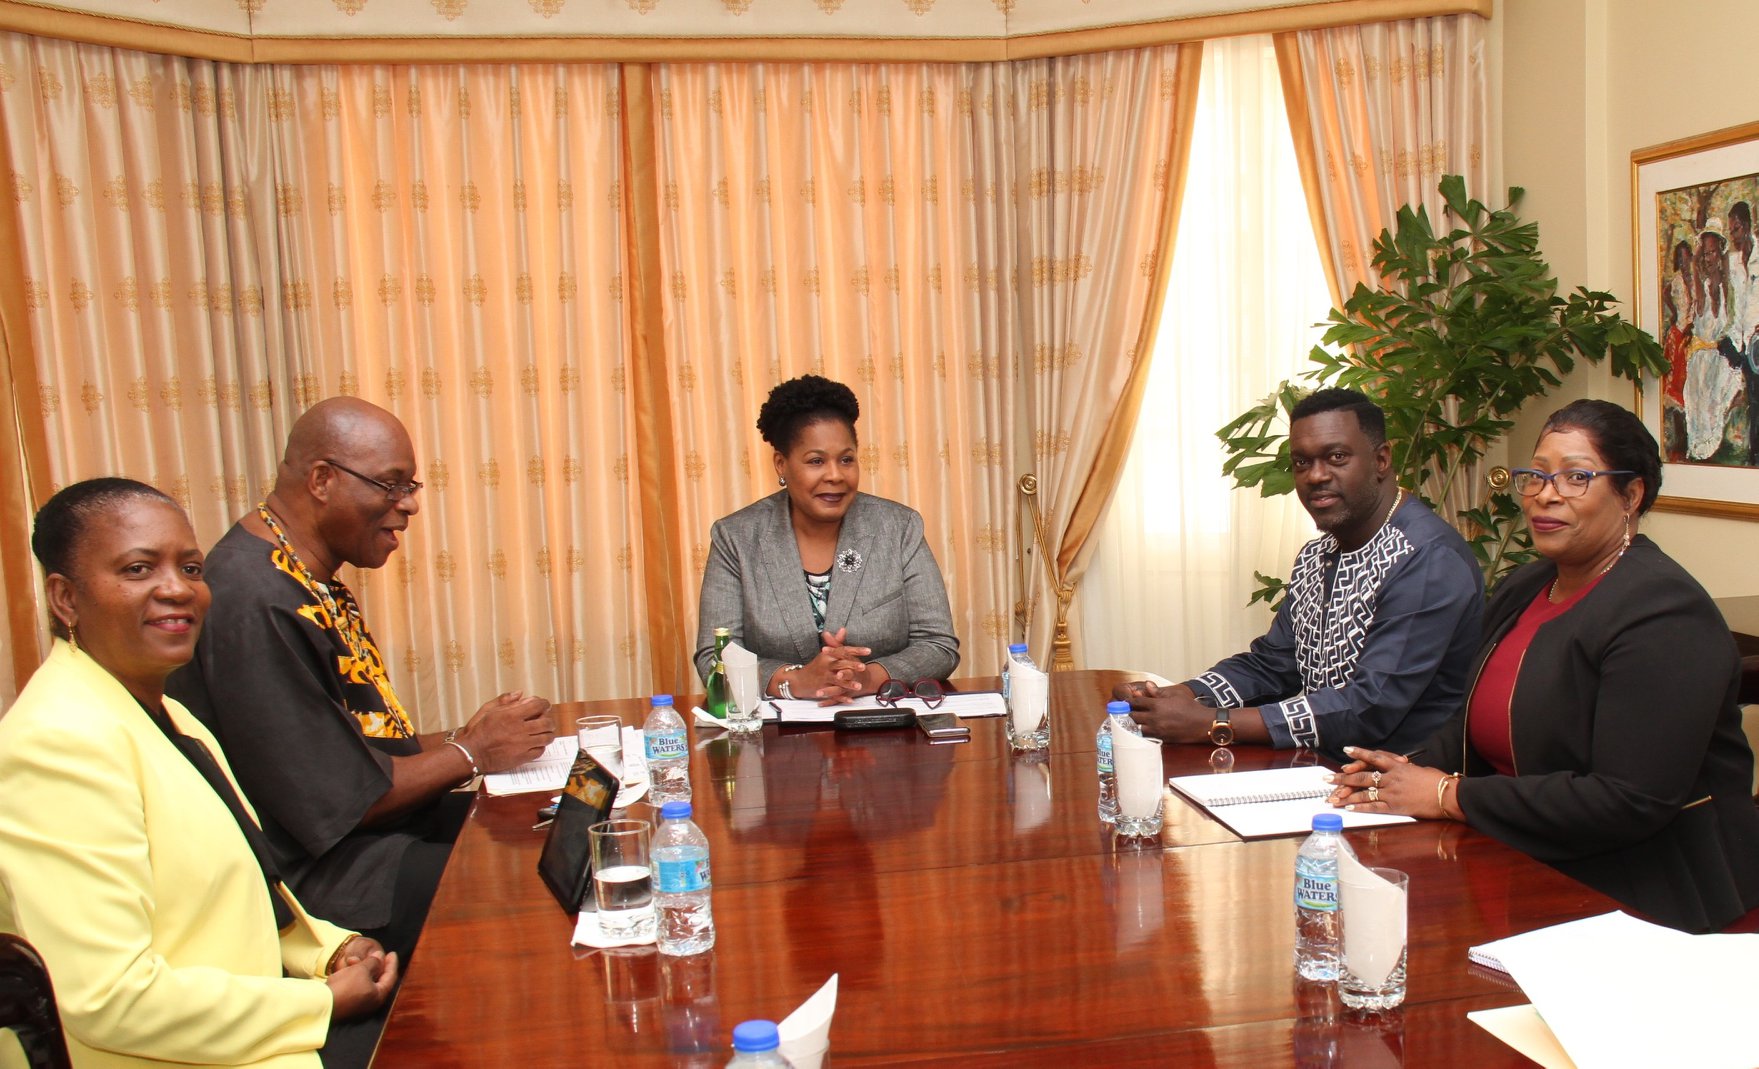 Her Excellency Meets with Representatives of NATUC